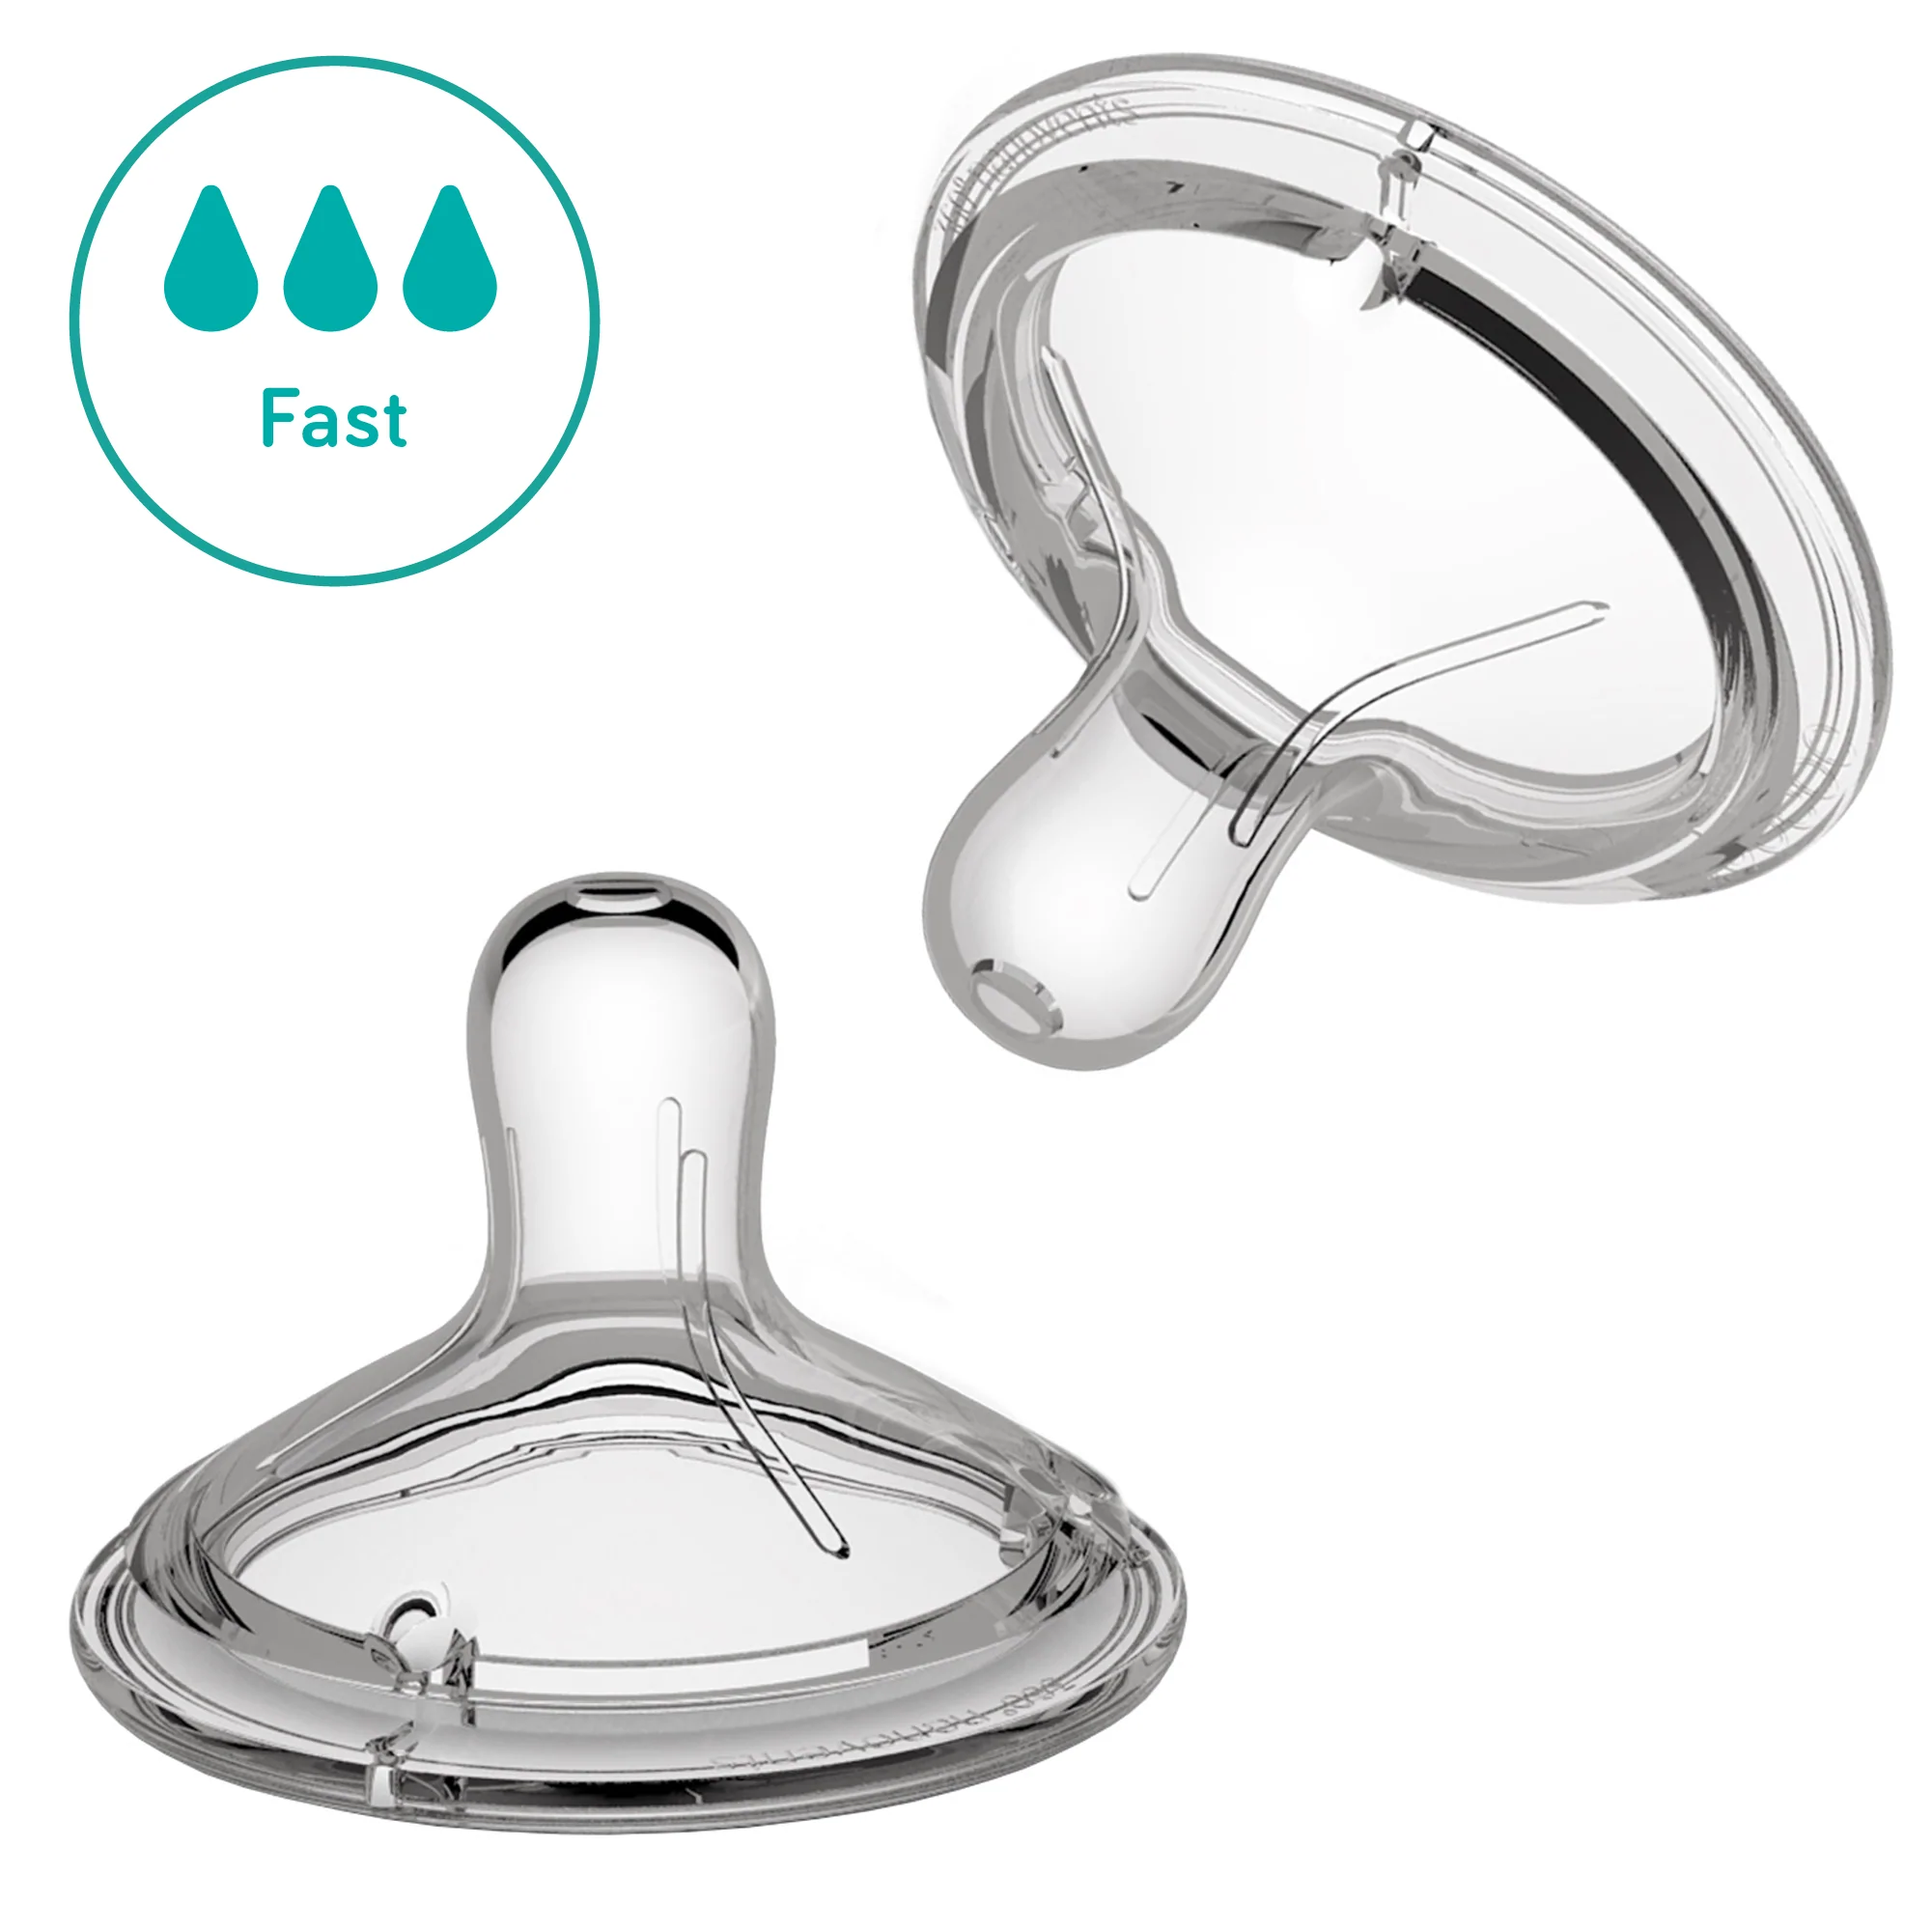 Nanobebe FAST FLOW 6m+ Advanced Venting Silicone Teat -2 PACK